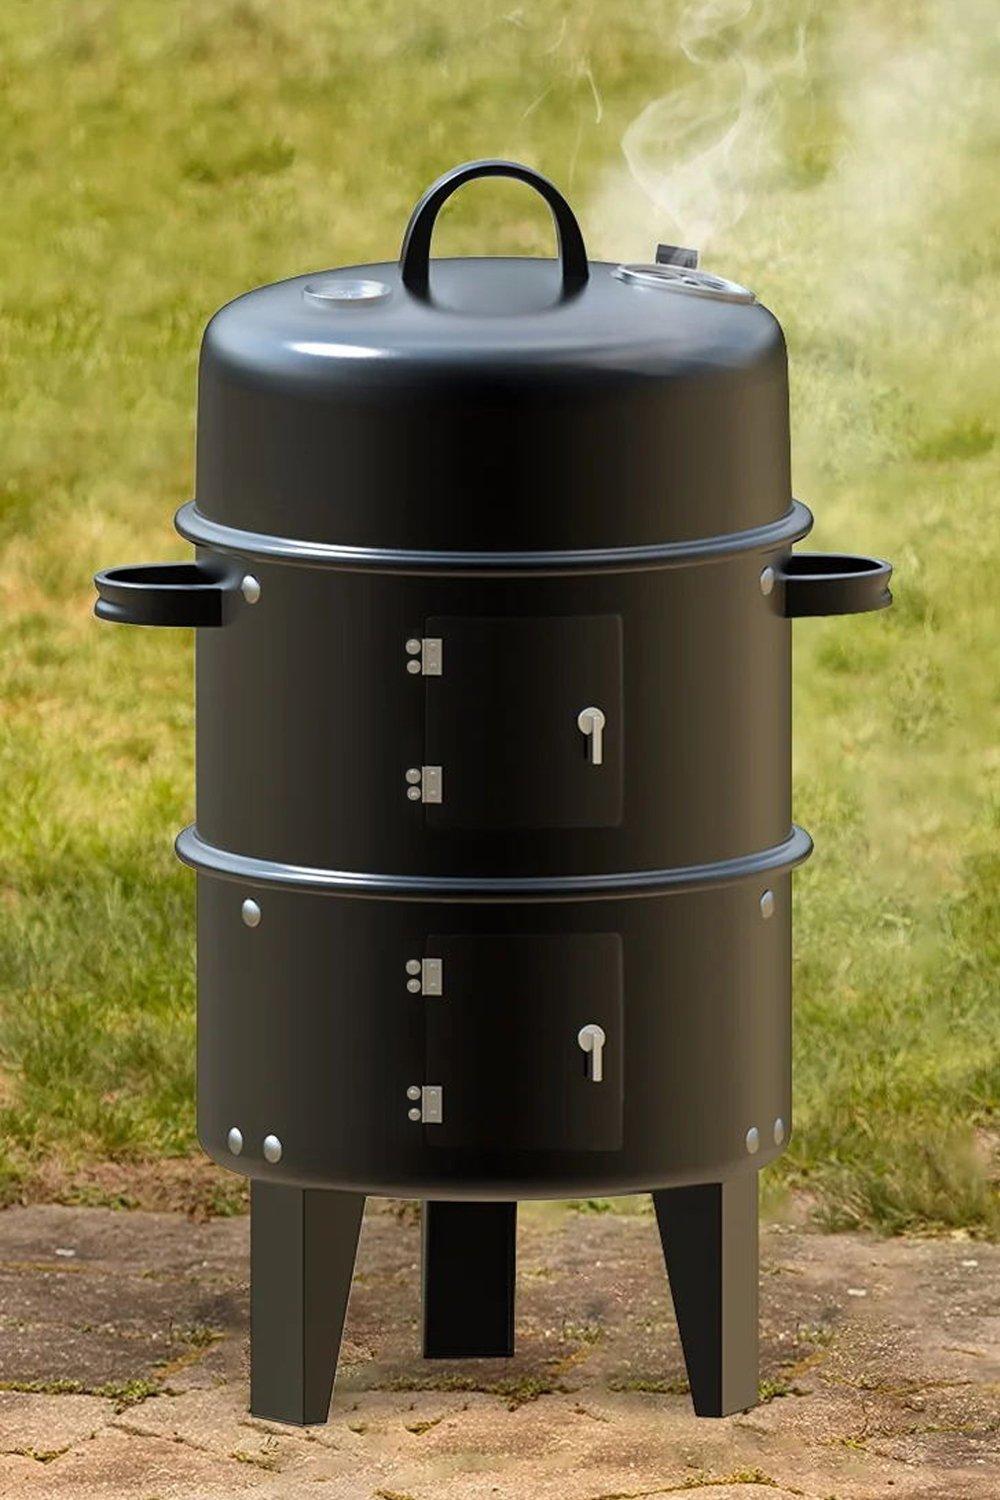 Outdoor Upright Smoker Grill Charcoal BBQ